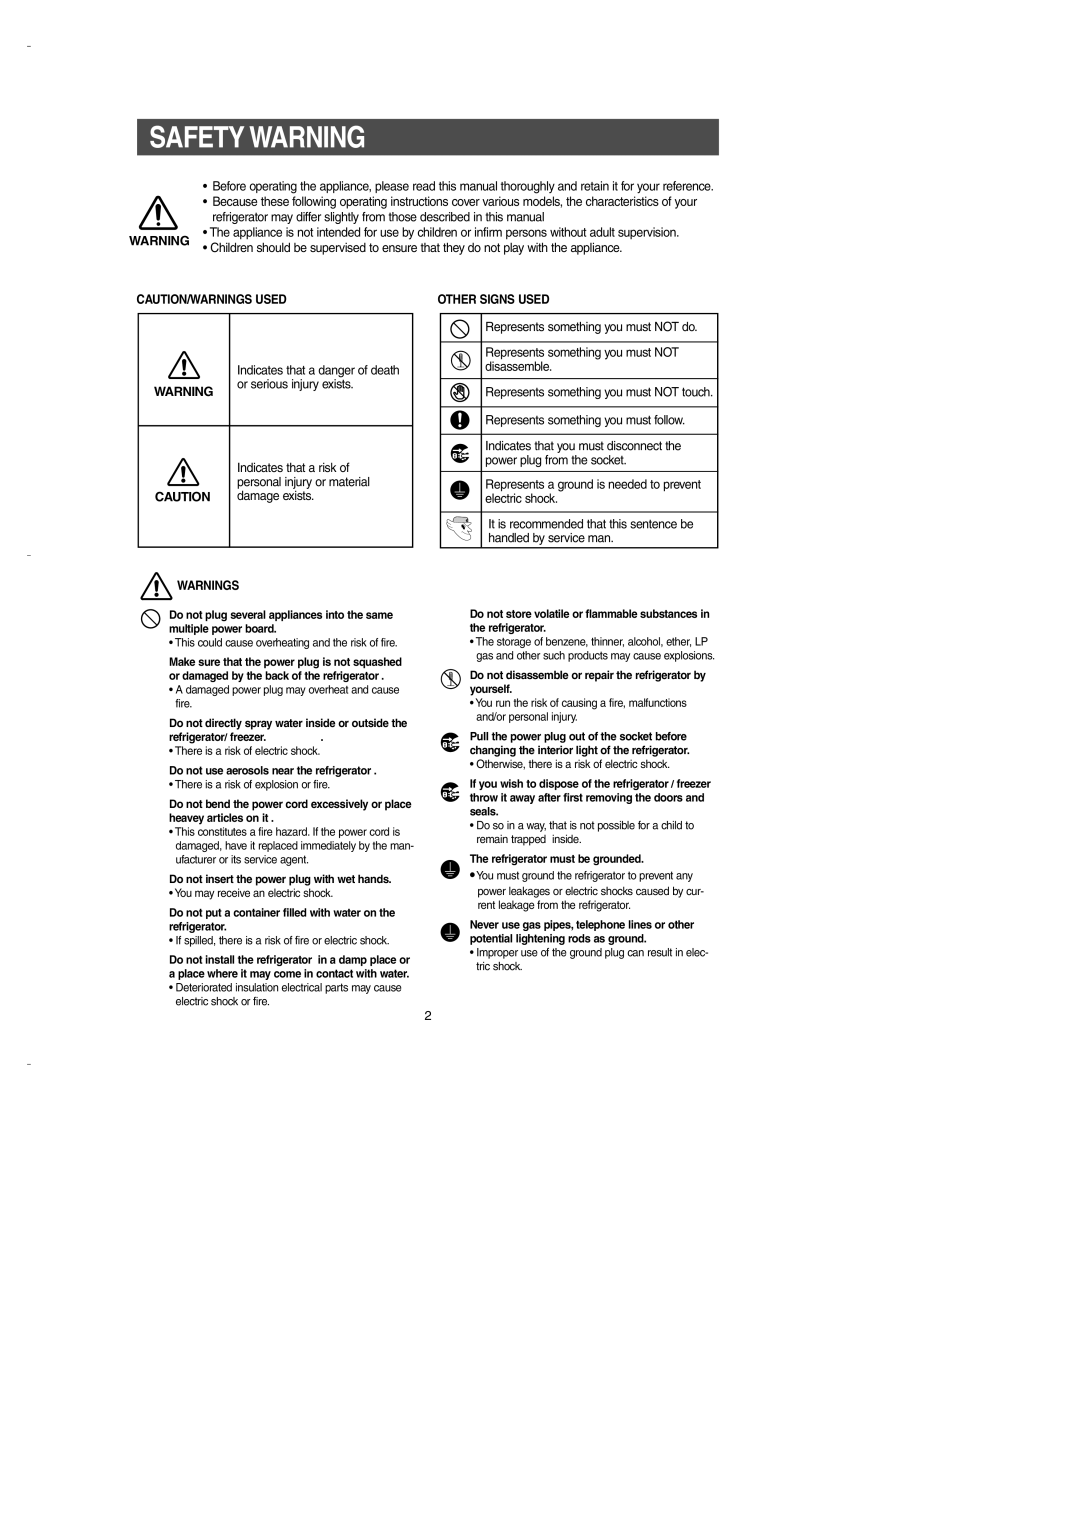 Samsung DA99-00275B owner manual Safety Warning, Caution/Warnings Used, Other Signs Used 